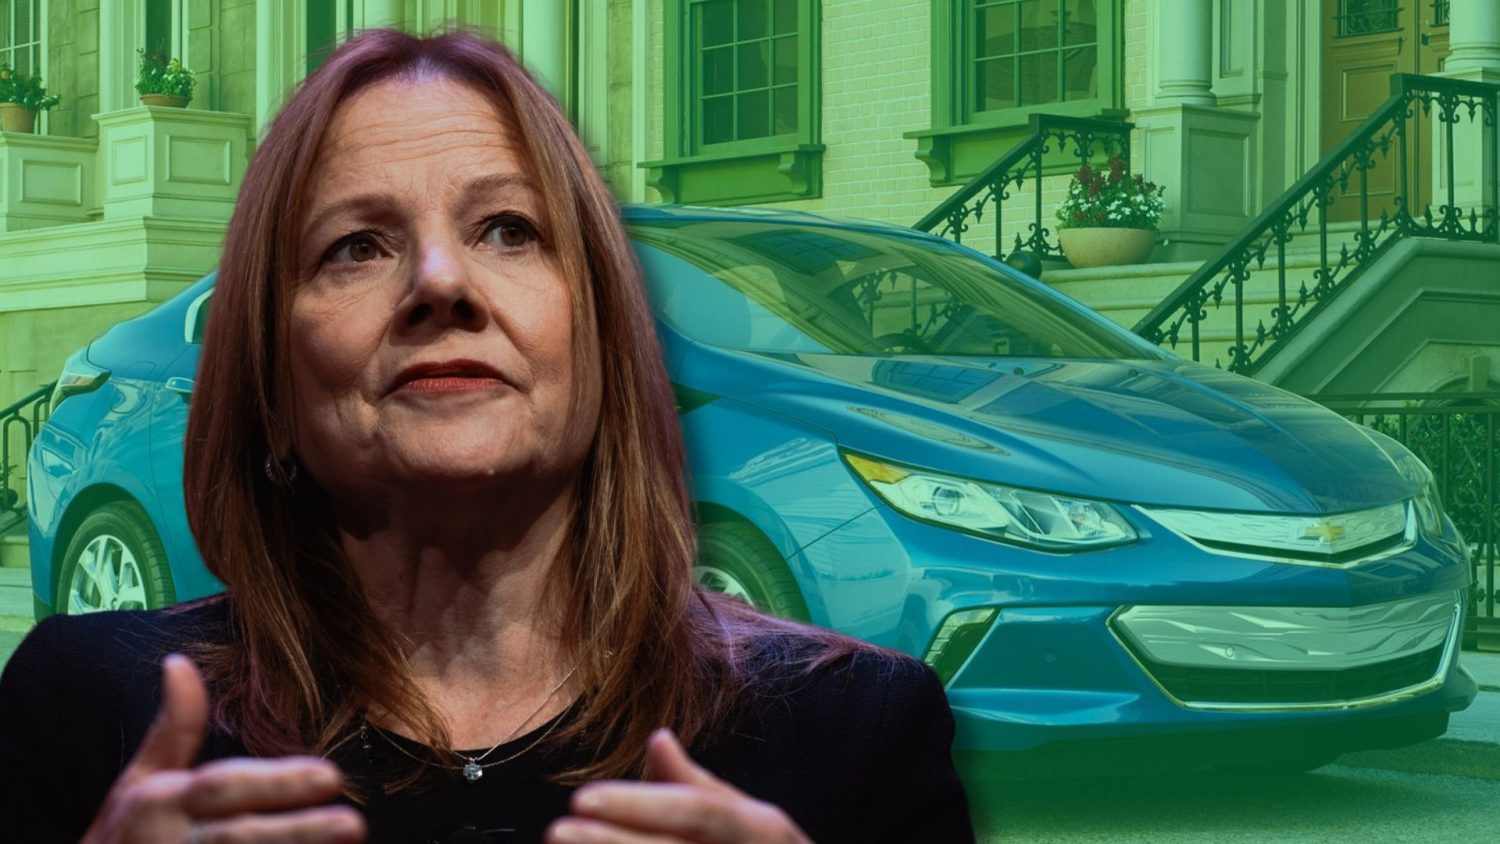 General Motors plans to bring new hybrids to the U.S. market, reversing course after saying it would only build fully-electric vehicles.